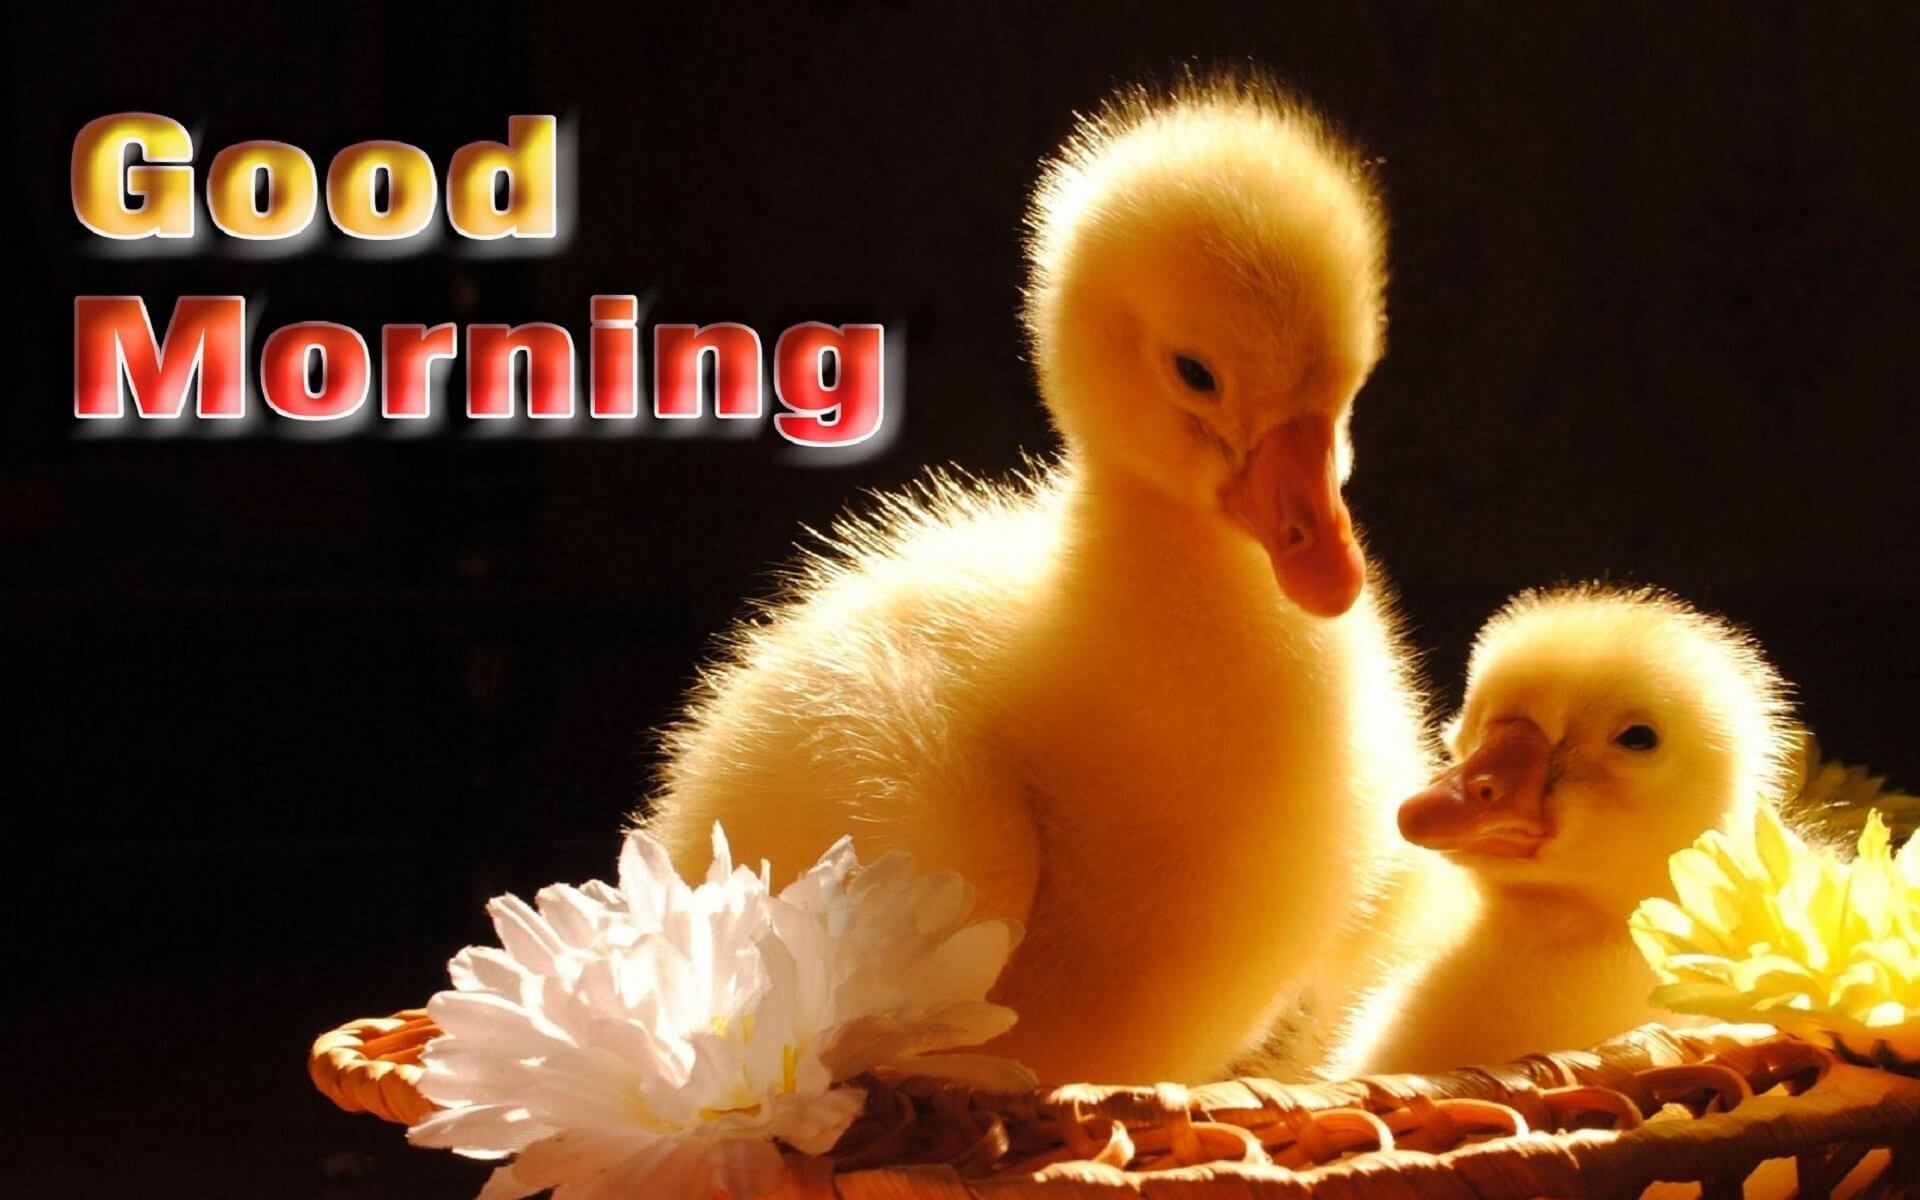 Good morning picture duck download free - Picturesdown